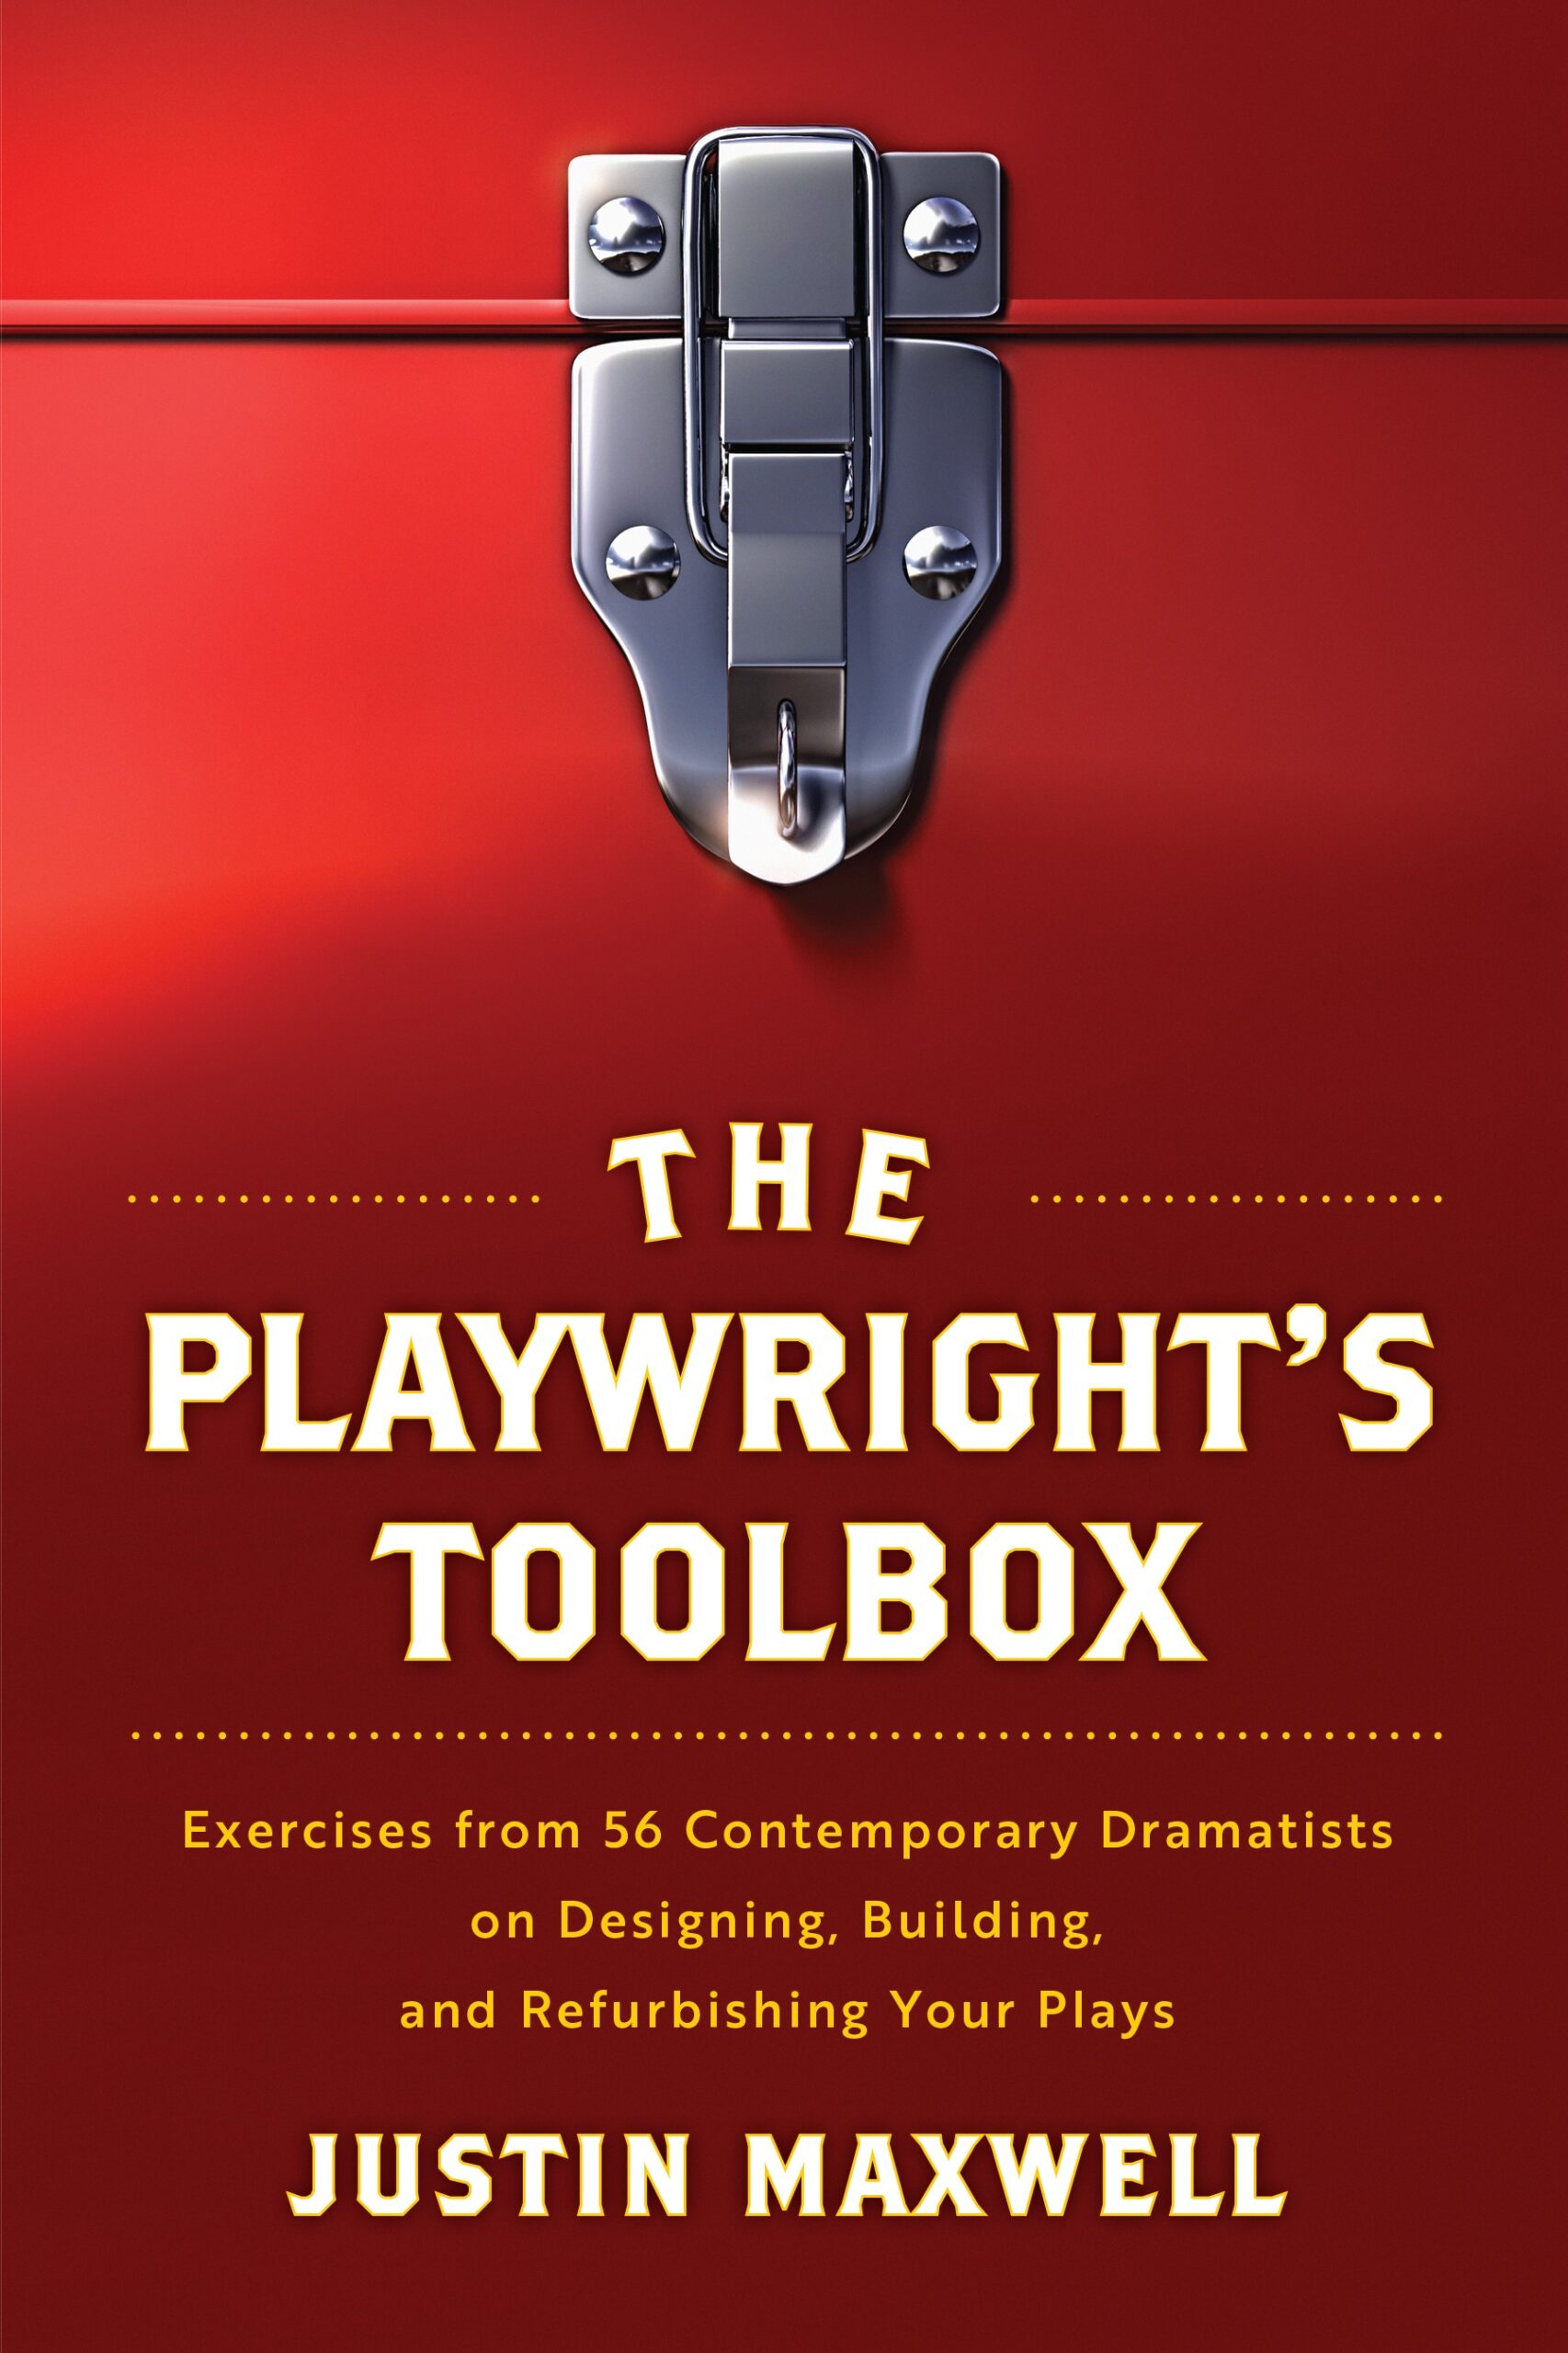 The Playwright’s Toolbox: An Informal Discussion About Writing with Justin Maxwell